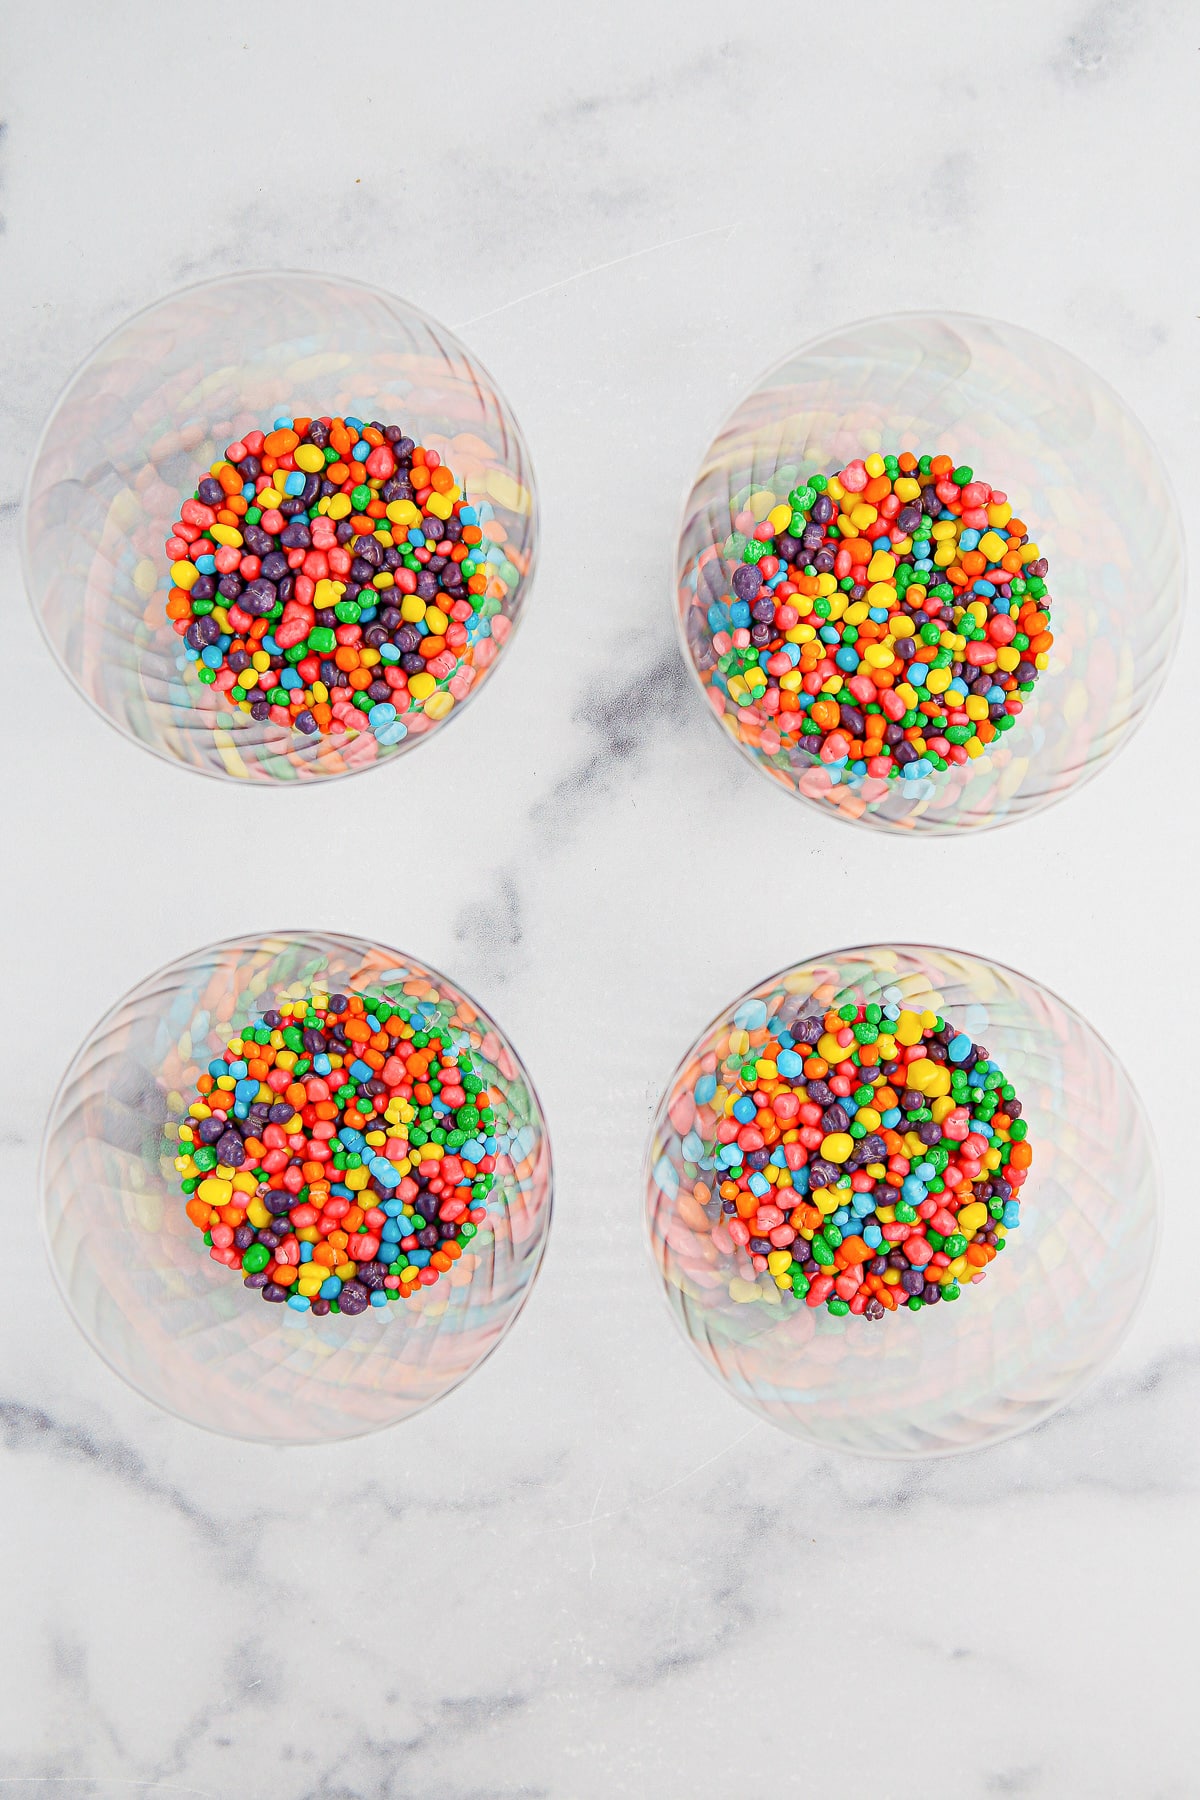 Nerd candies in four clear cups from overhead.